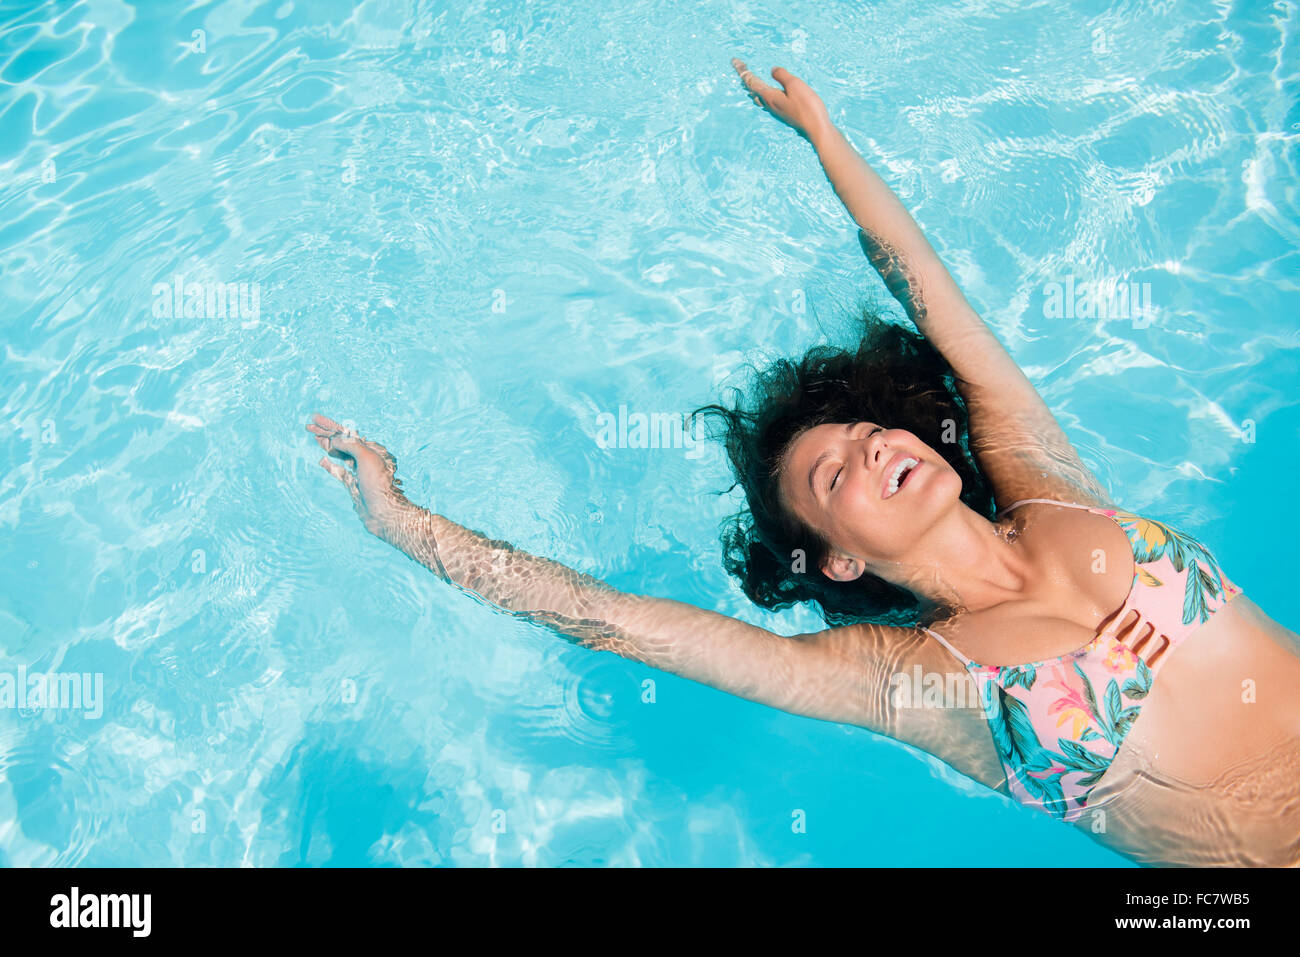 Caucasian woman floating in swimming pool Banque D'Images